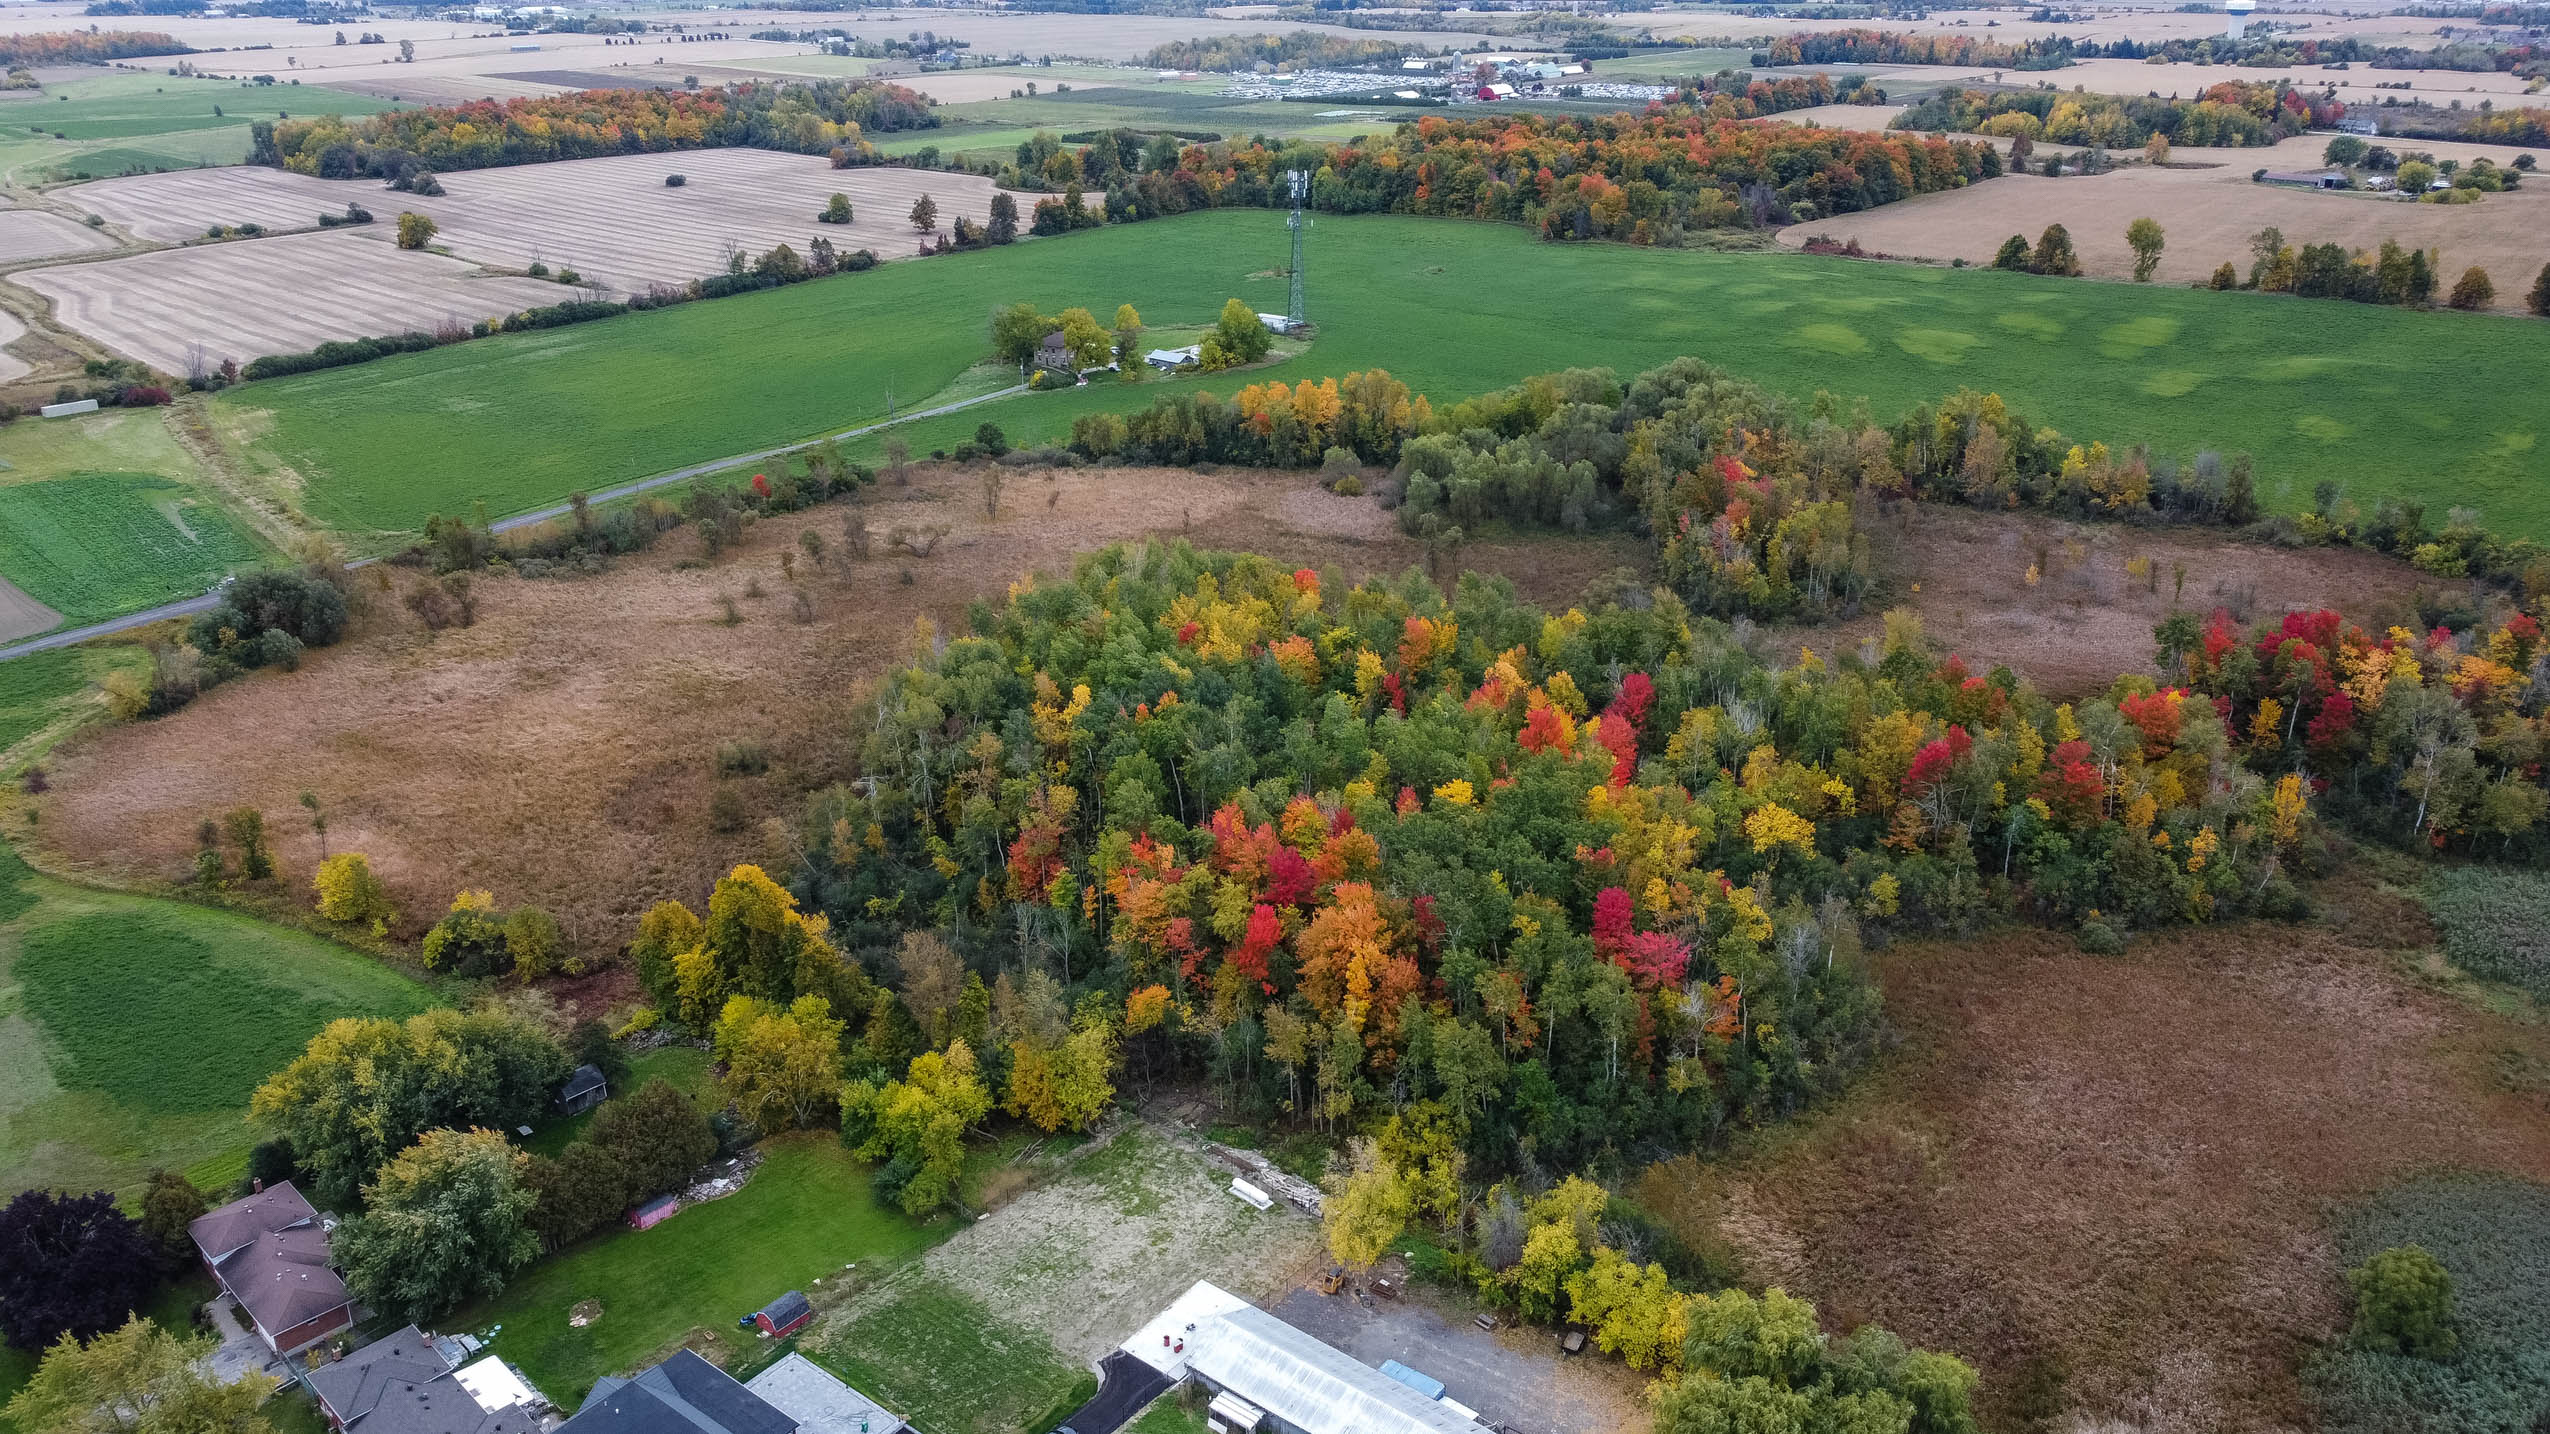 Fall foliage and farmer's fields seen from above